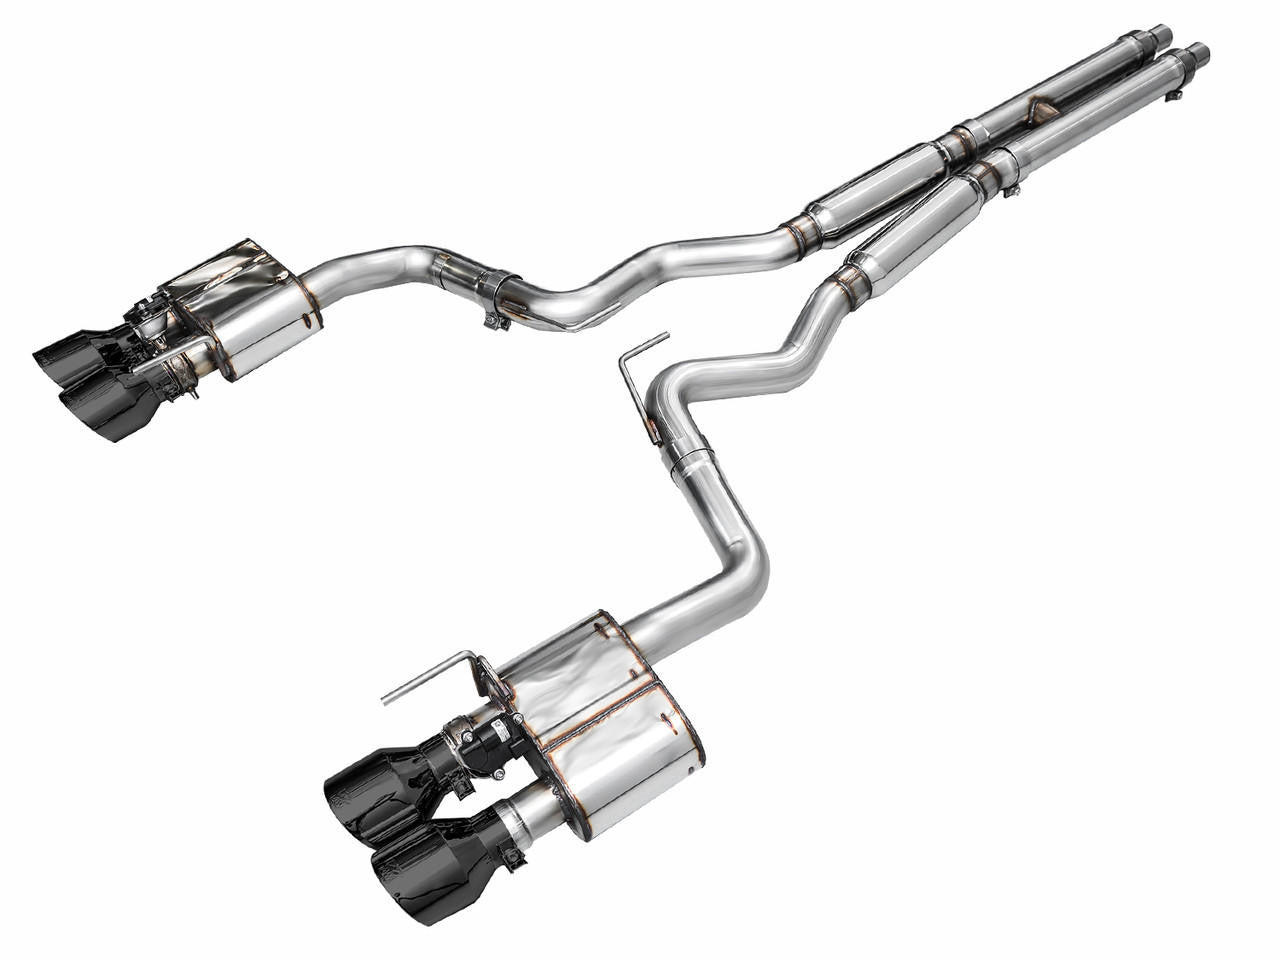 AWE Tuning AWE SwitchPath Exhaust for S650 Mustang GT Fastback - Quad Diamond Black Tips 3025-43650 